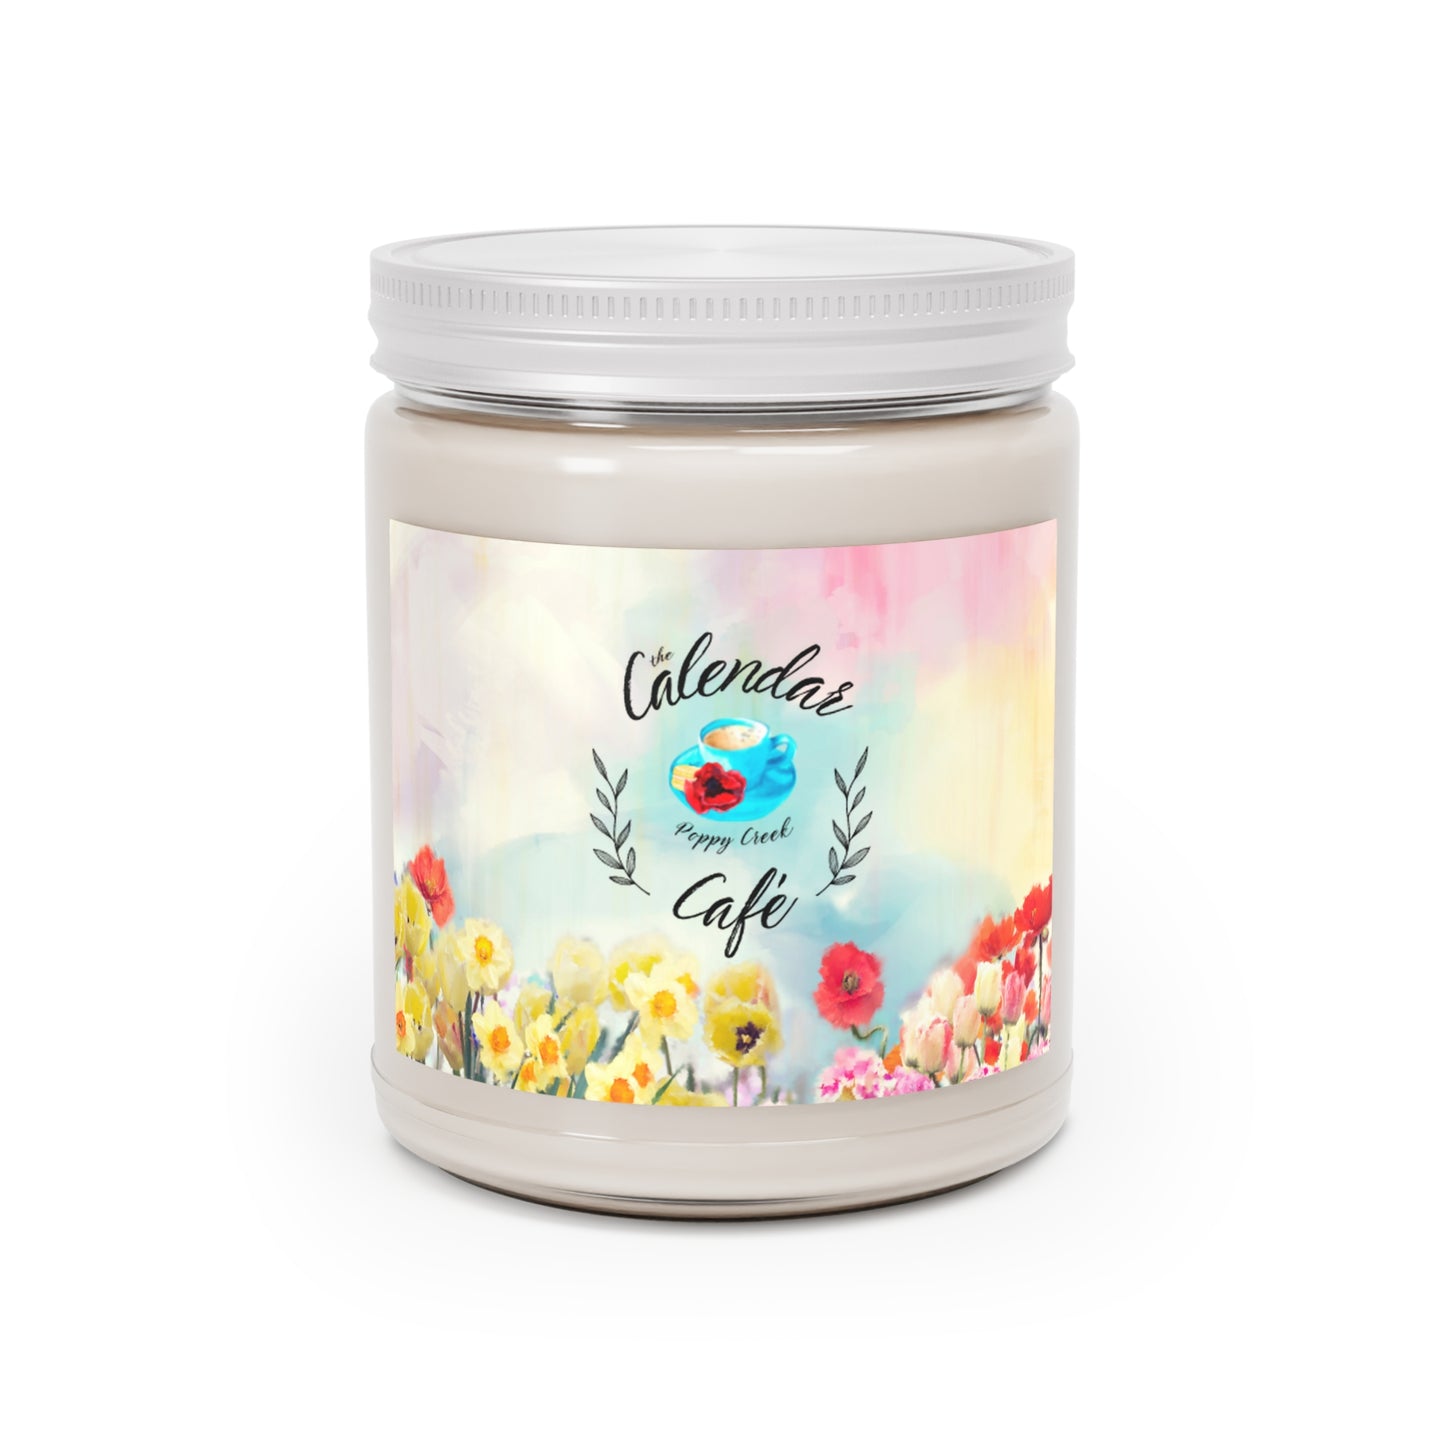 The Calendar Café Scented Soy Candle, 9oz (Classic Design) - FREE U.S. SHIPPING